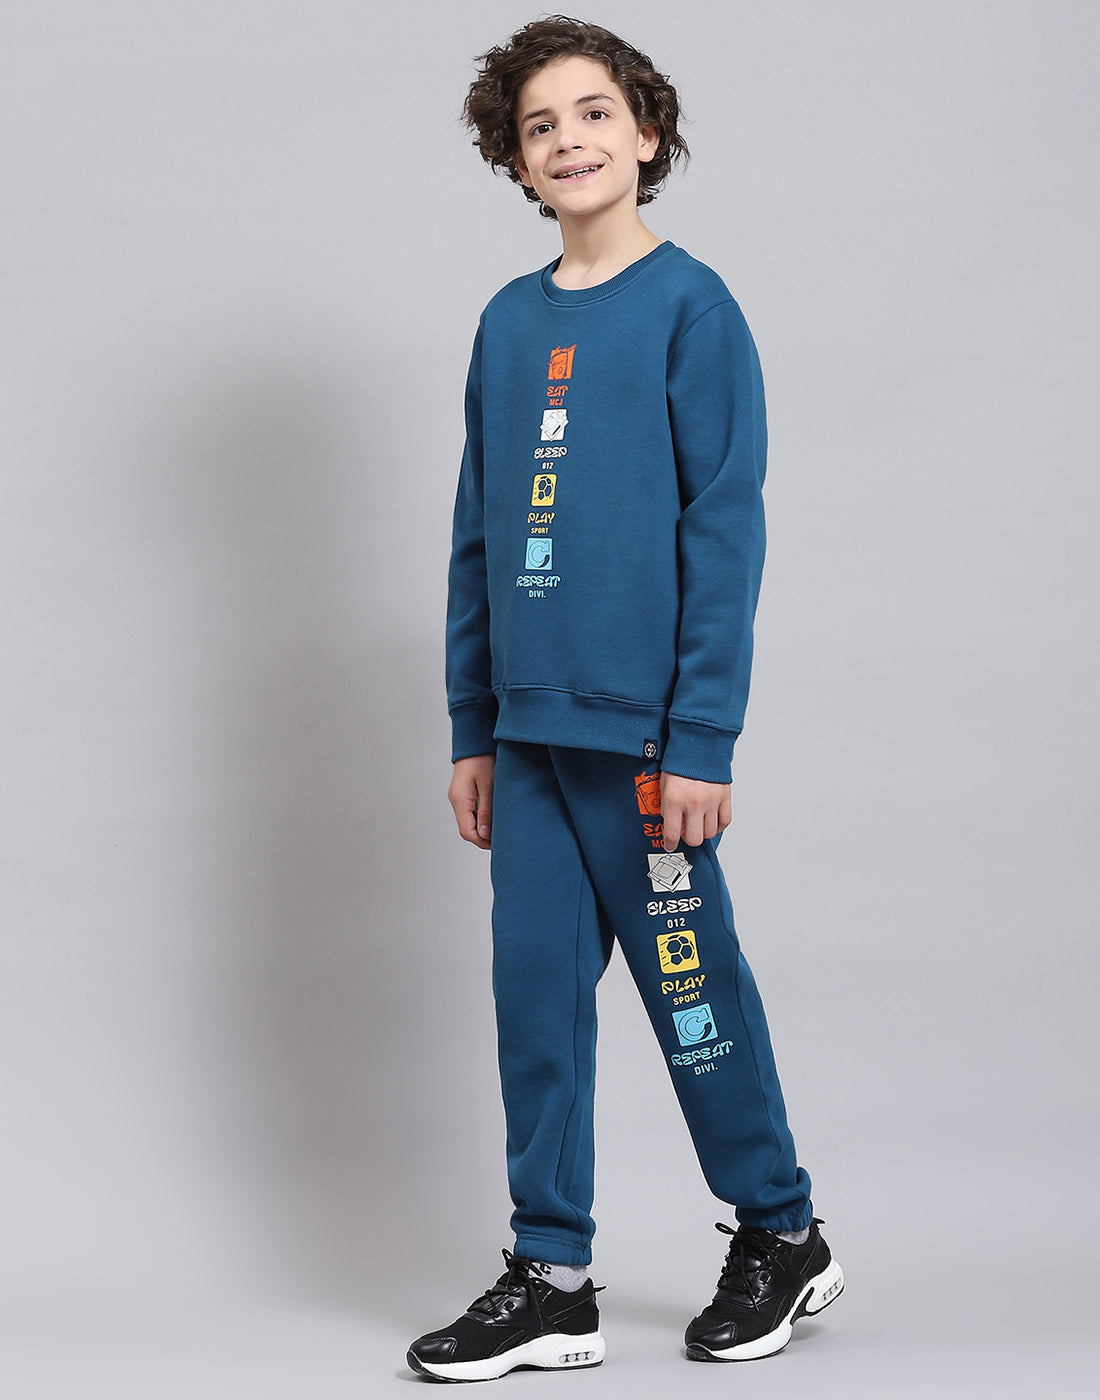 Boys Teal Blue Printed Round Neck Full Sleeve Tracksuits